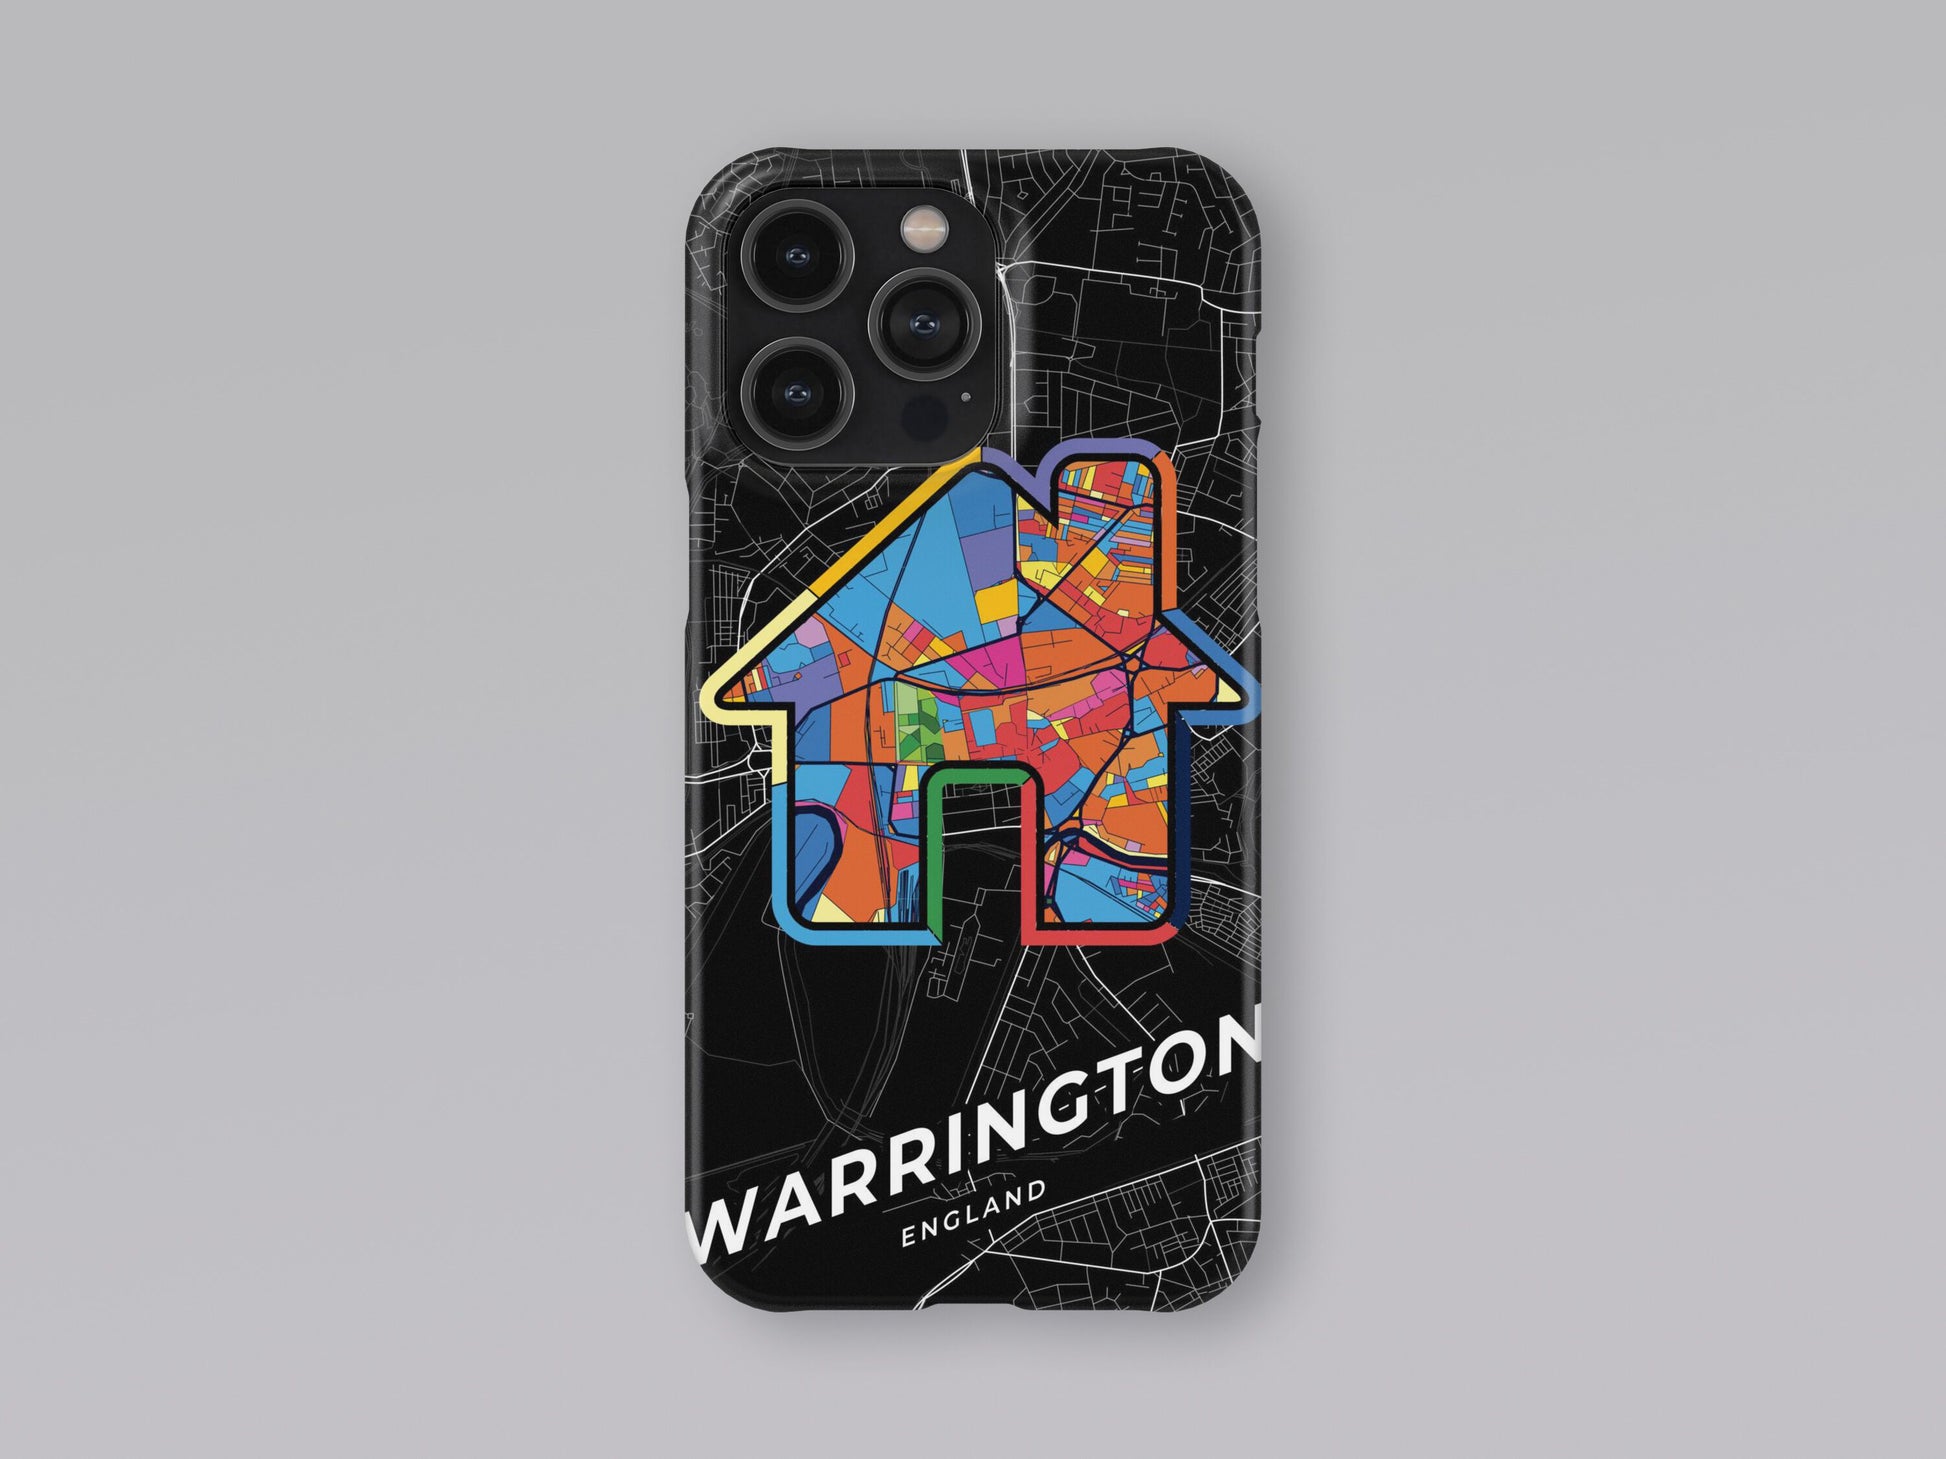 Warrington England slim phone case with colorful icon 3